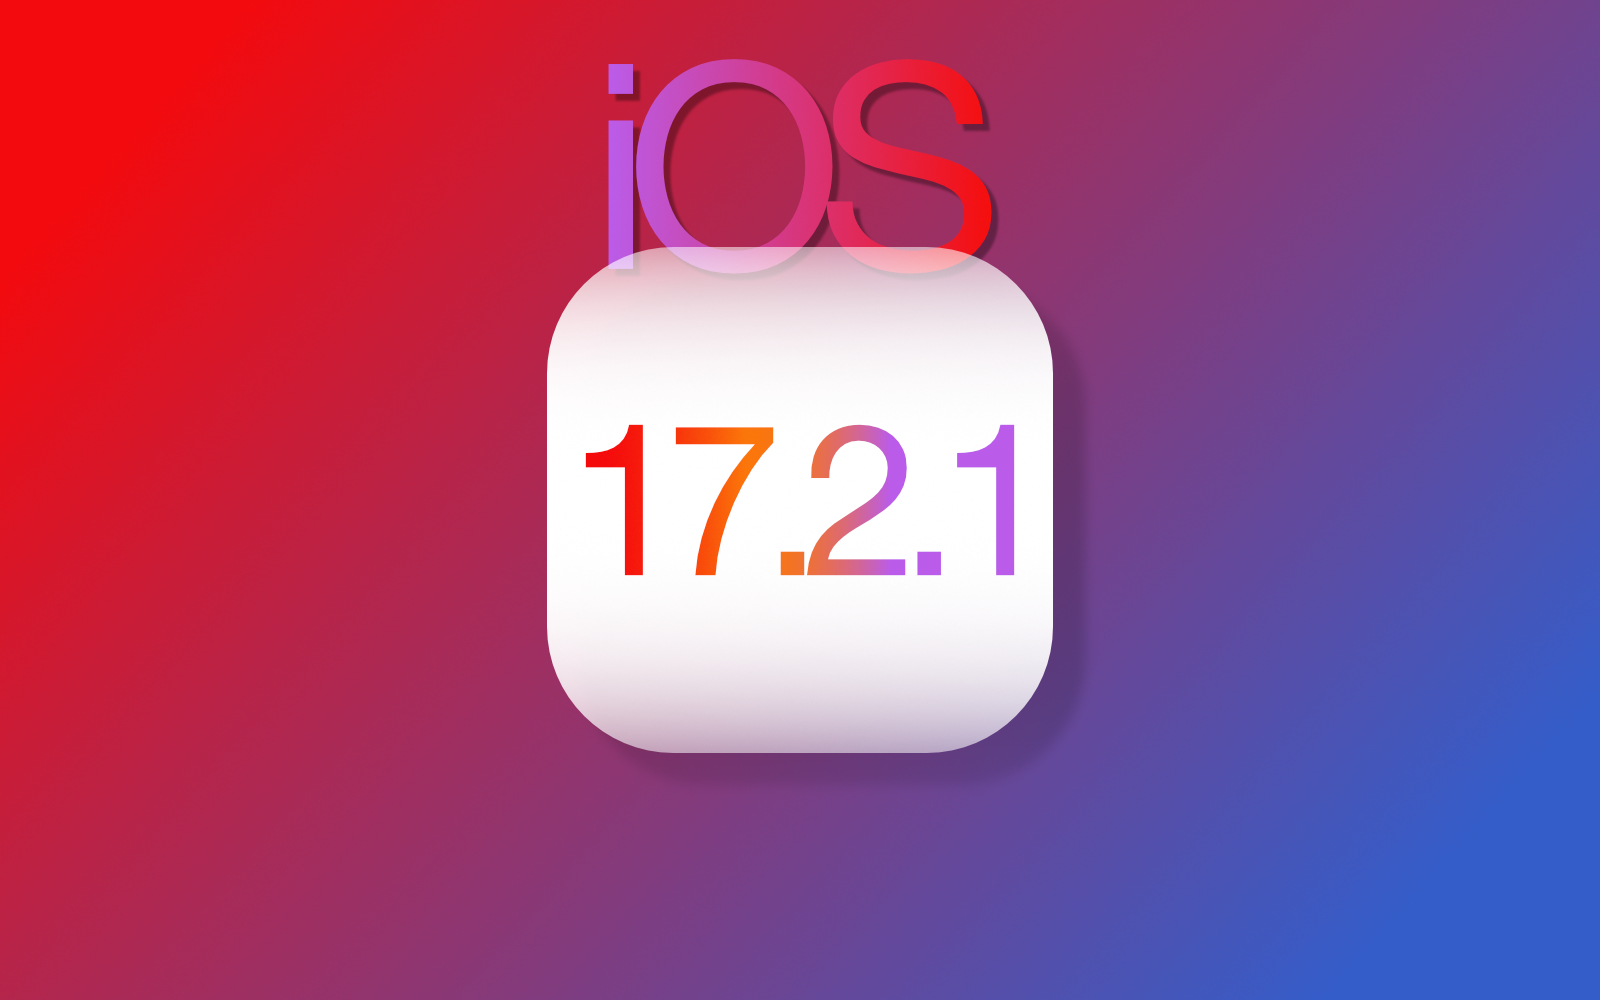 IOS17 2 1 official release